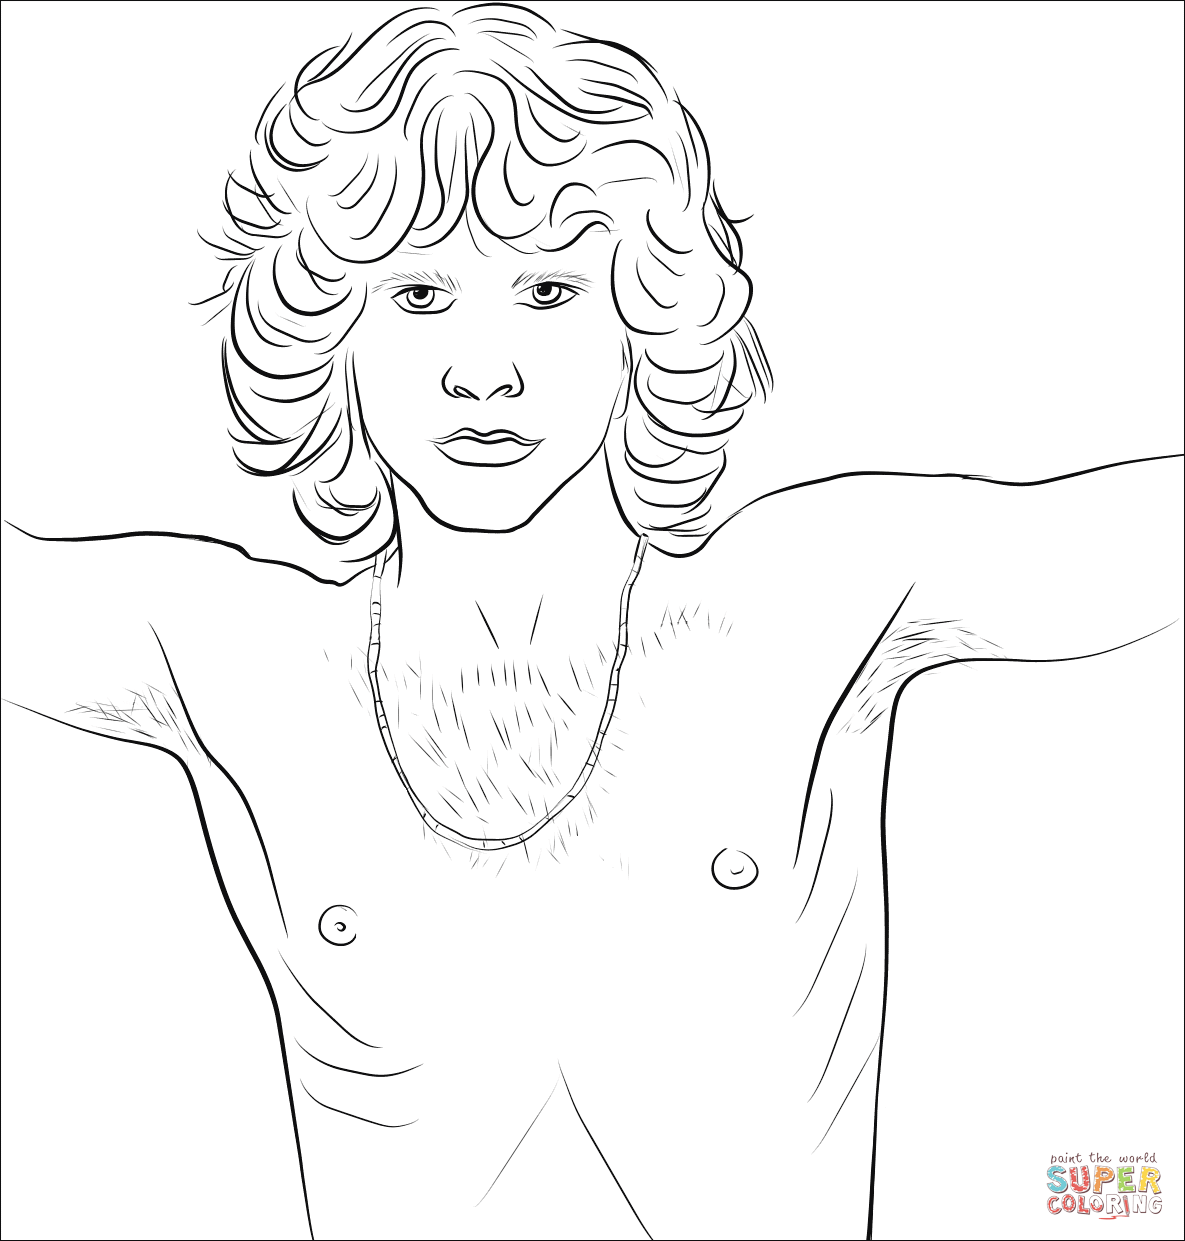 Jim morrison the young lion coloring page free printable coloring pages